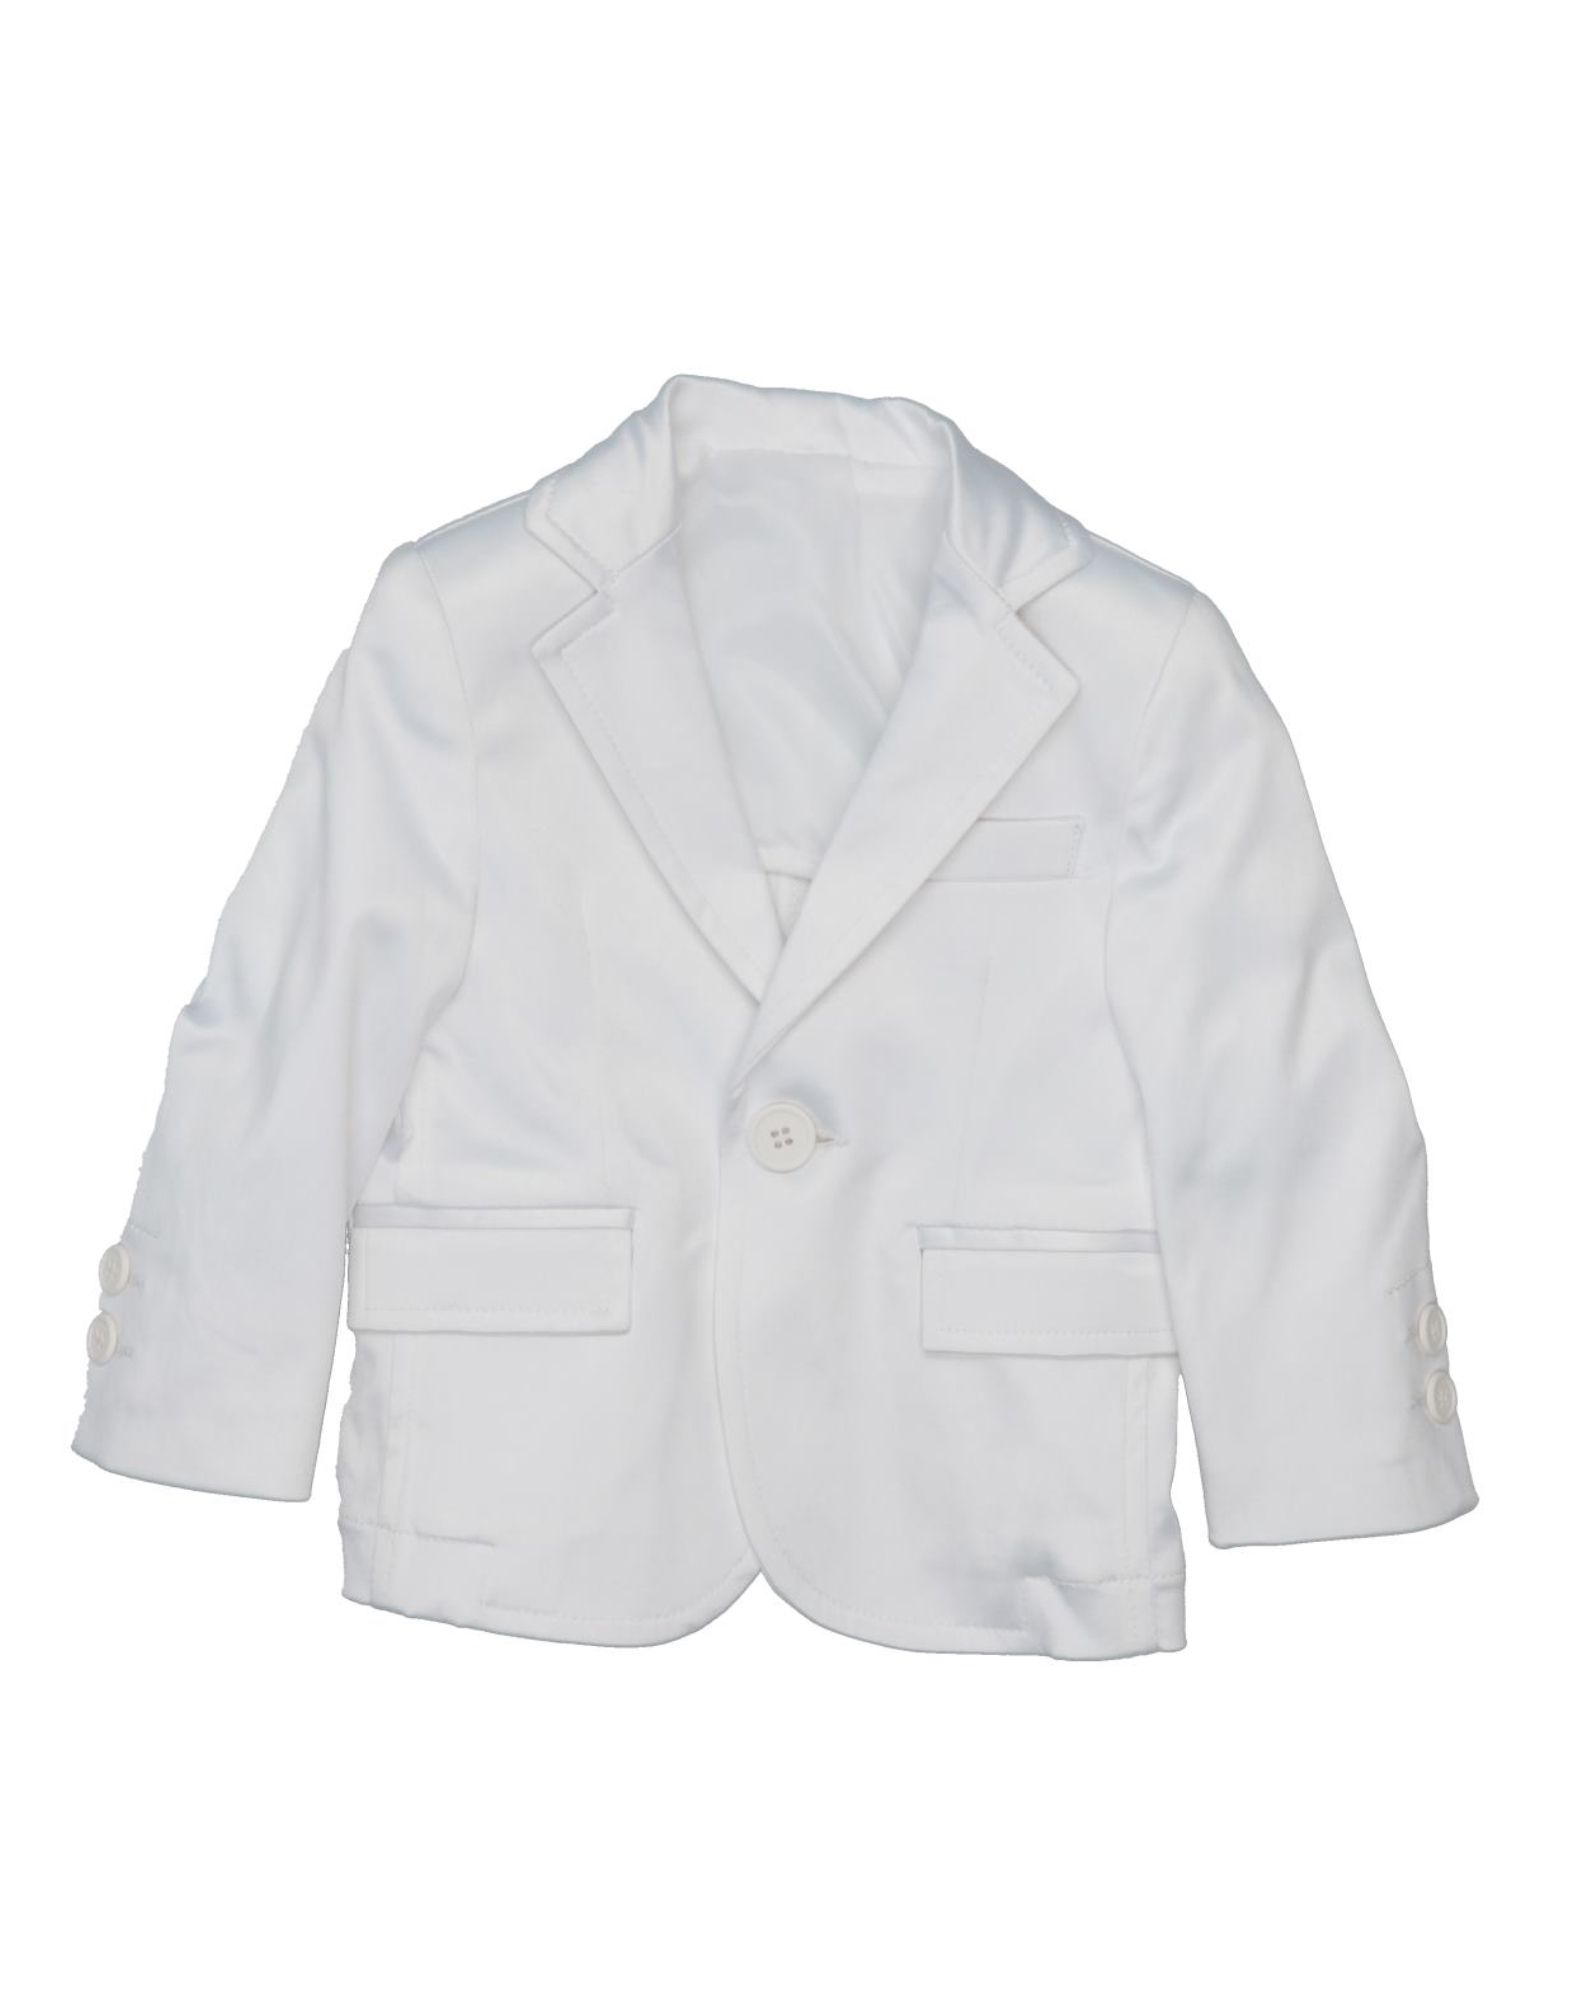 Frank Lin Urban Chic Kids' Suit Jackets In White